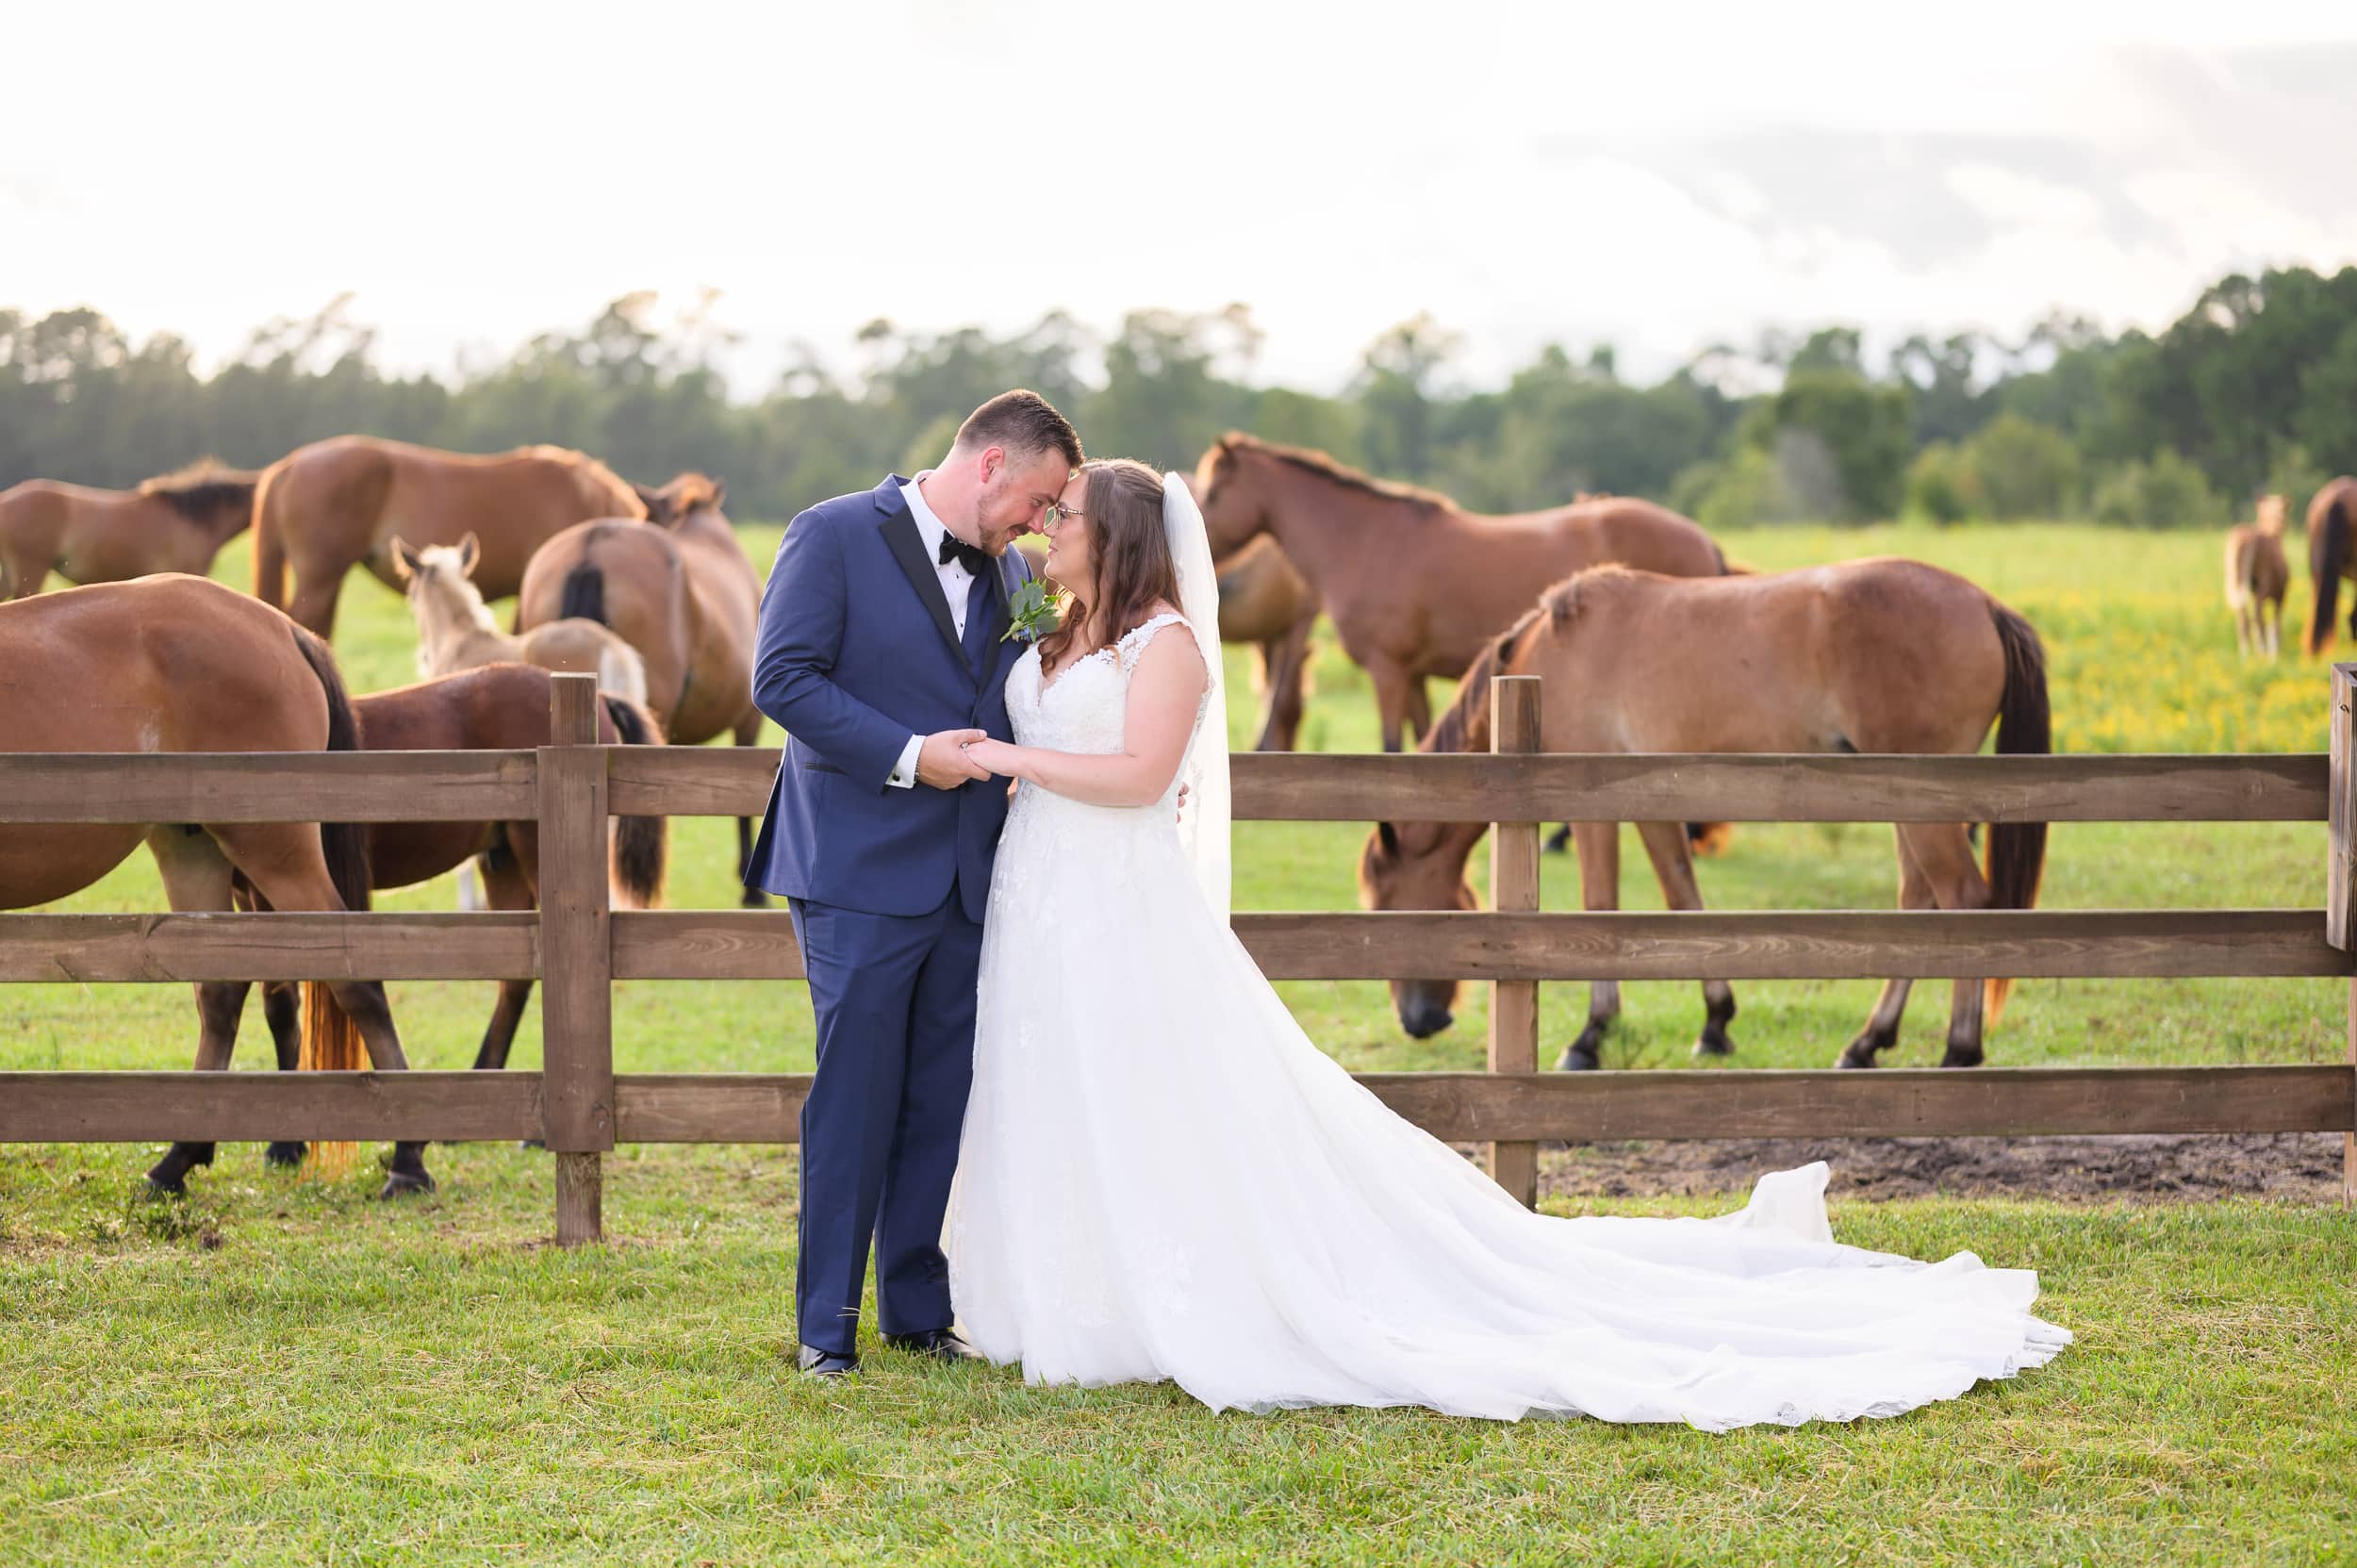 Wedding at WildHorse at Parker Farms with horses and a beautiful sunset